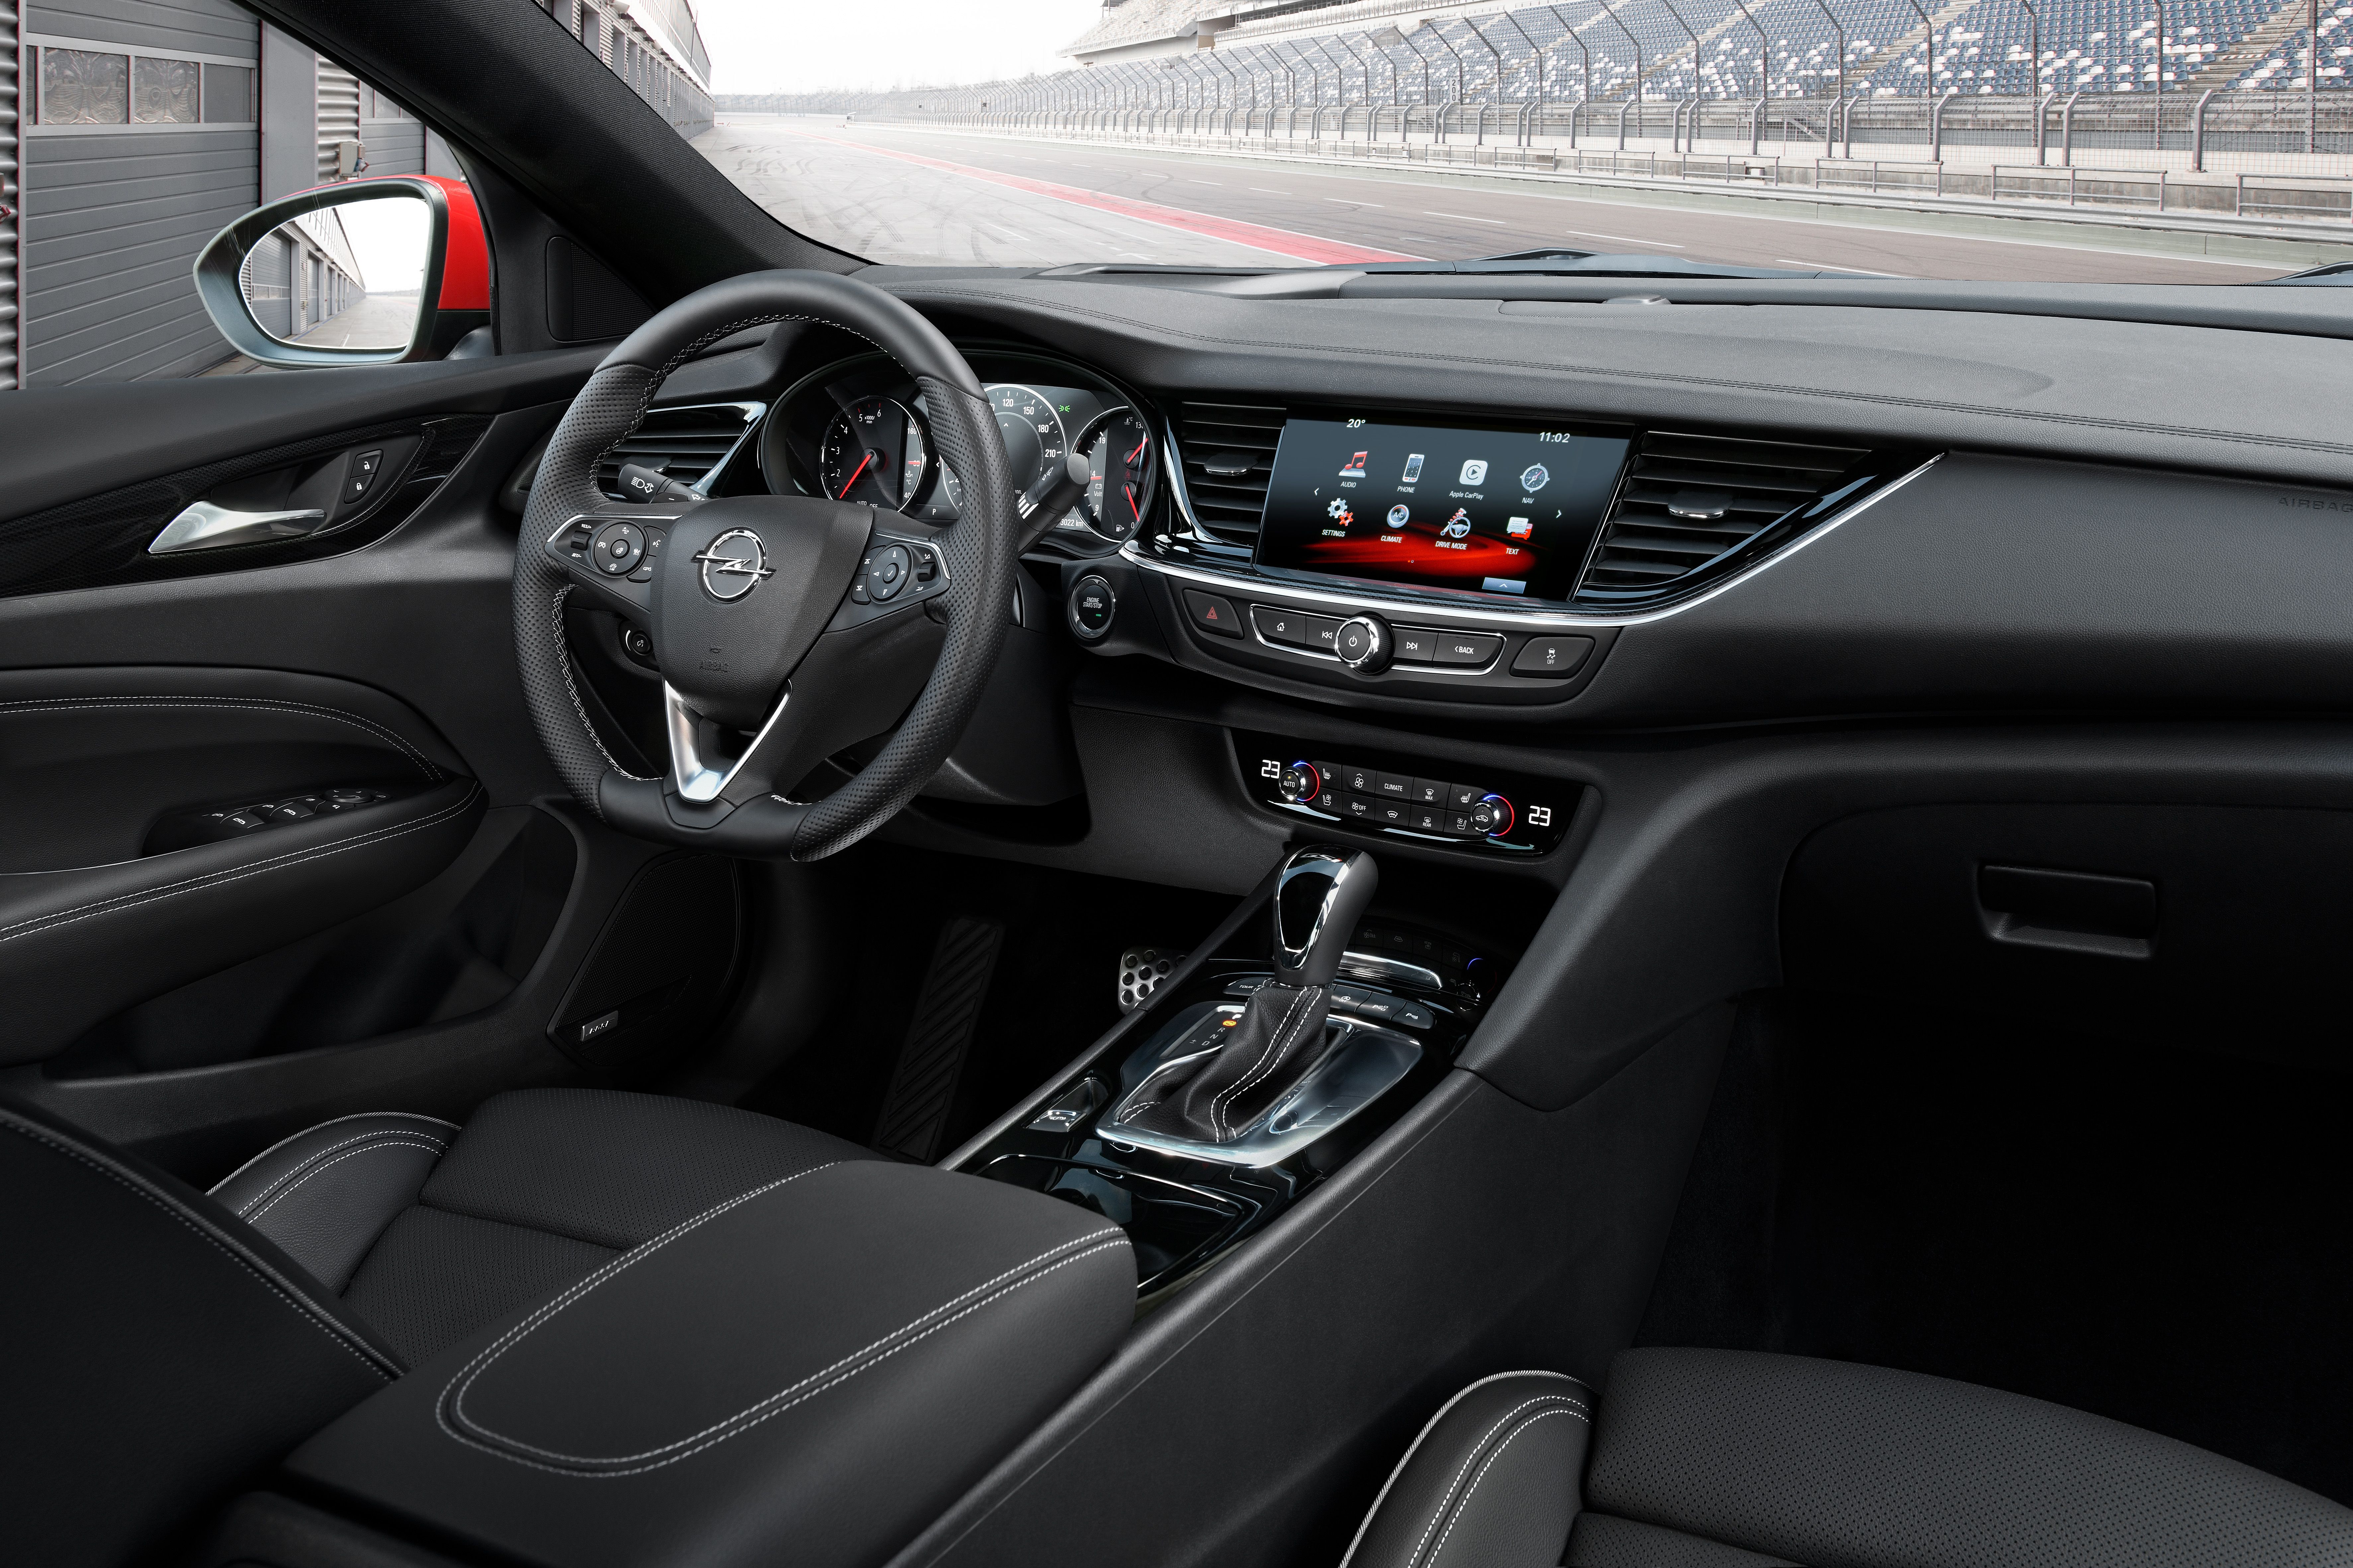 Opel Insignia Sports Tourer interior specifications